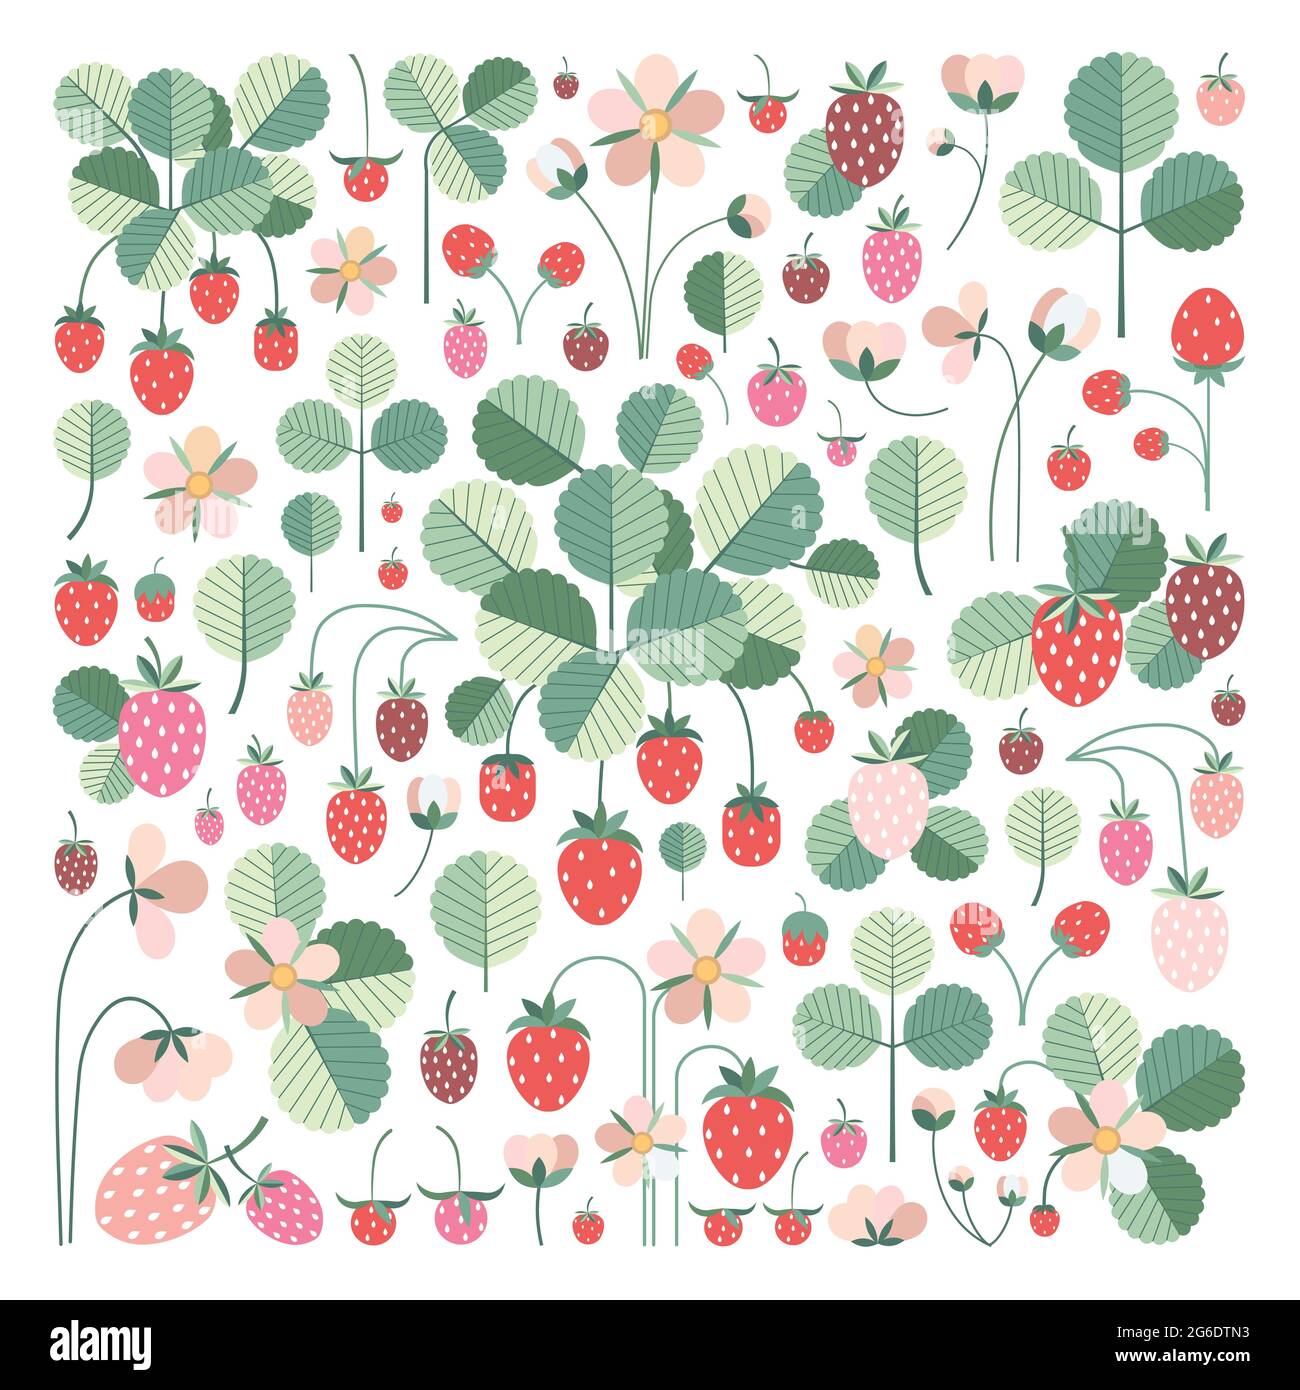 Garden Strawberry Set with Red Berries and Twigs Stock Vector